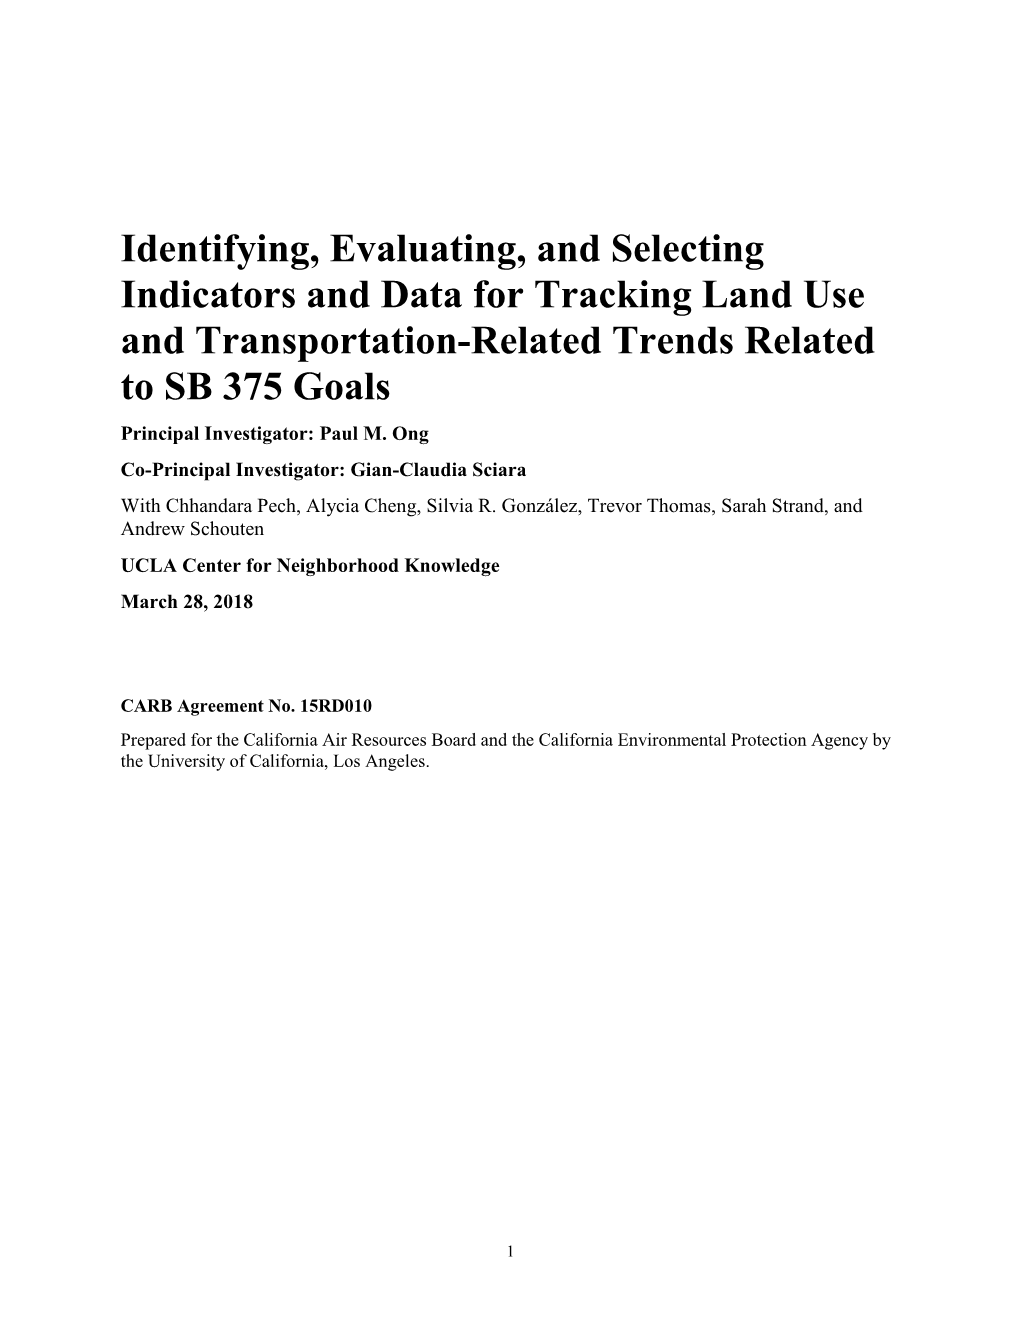 Identifying, Evaluating, and Selecting Indicators and Data for Tracking Land Use and Transportation-Related Trends Related to SB